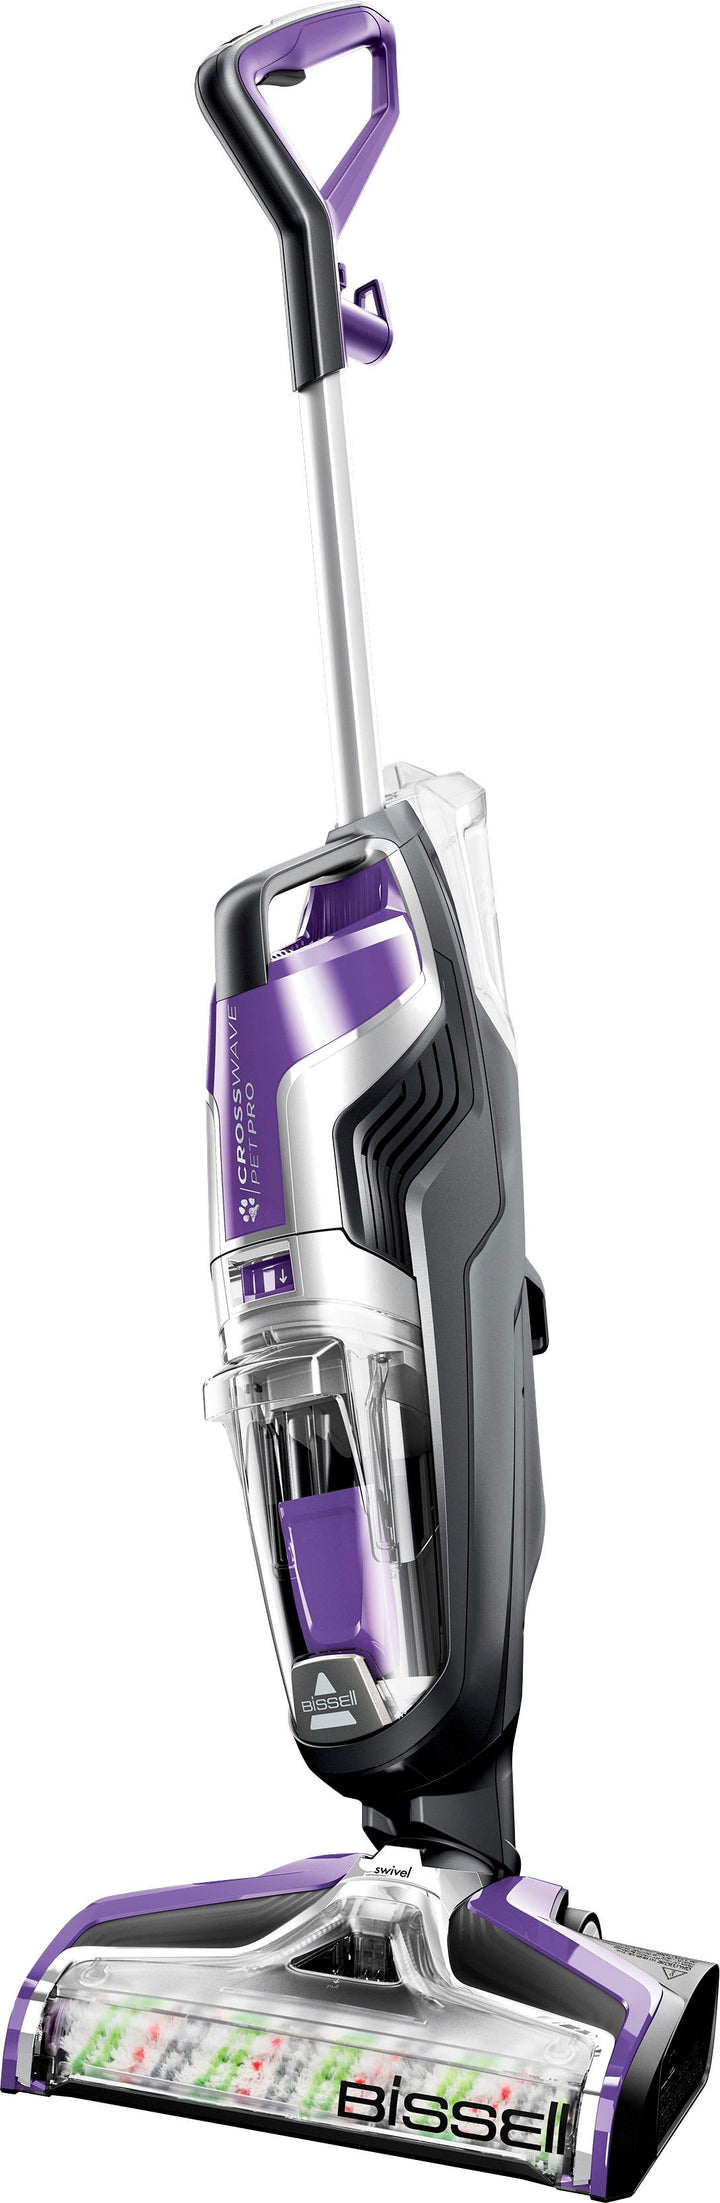 BISSELL - CrossWave Pet Pro All-in-One Multi-Surface Cleaner - Grapevine Purple and Sparkle Silver_5